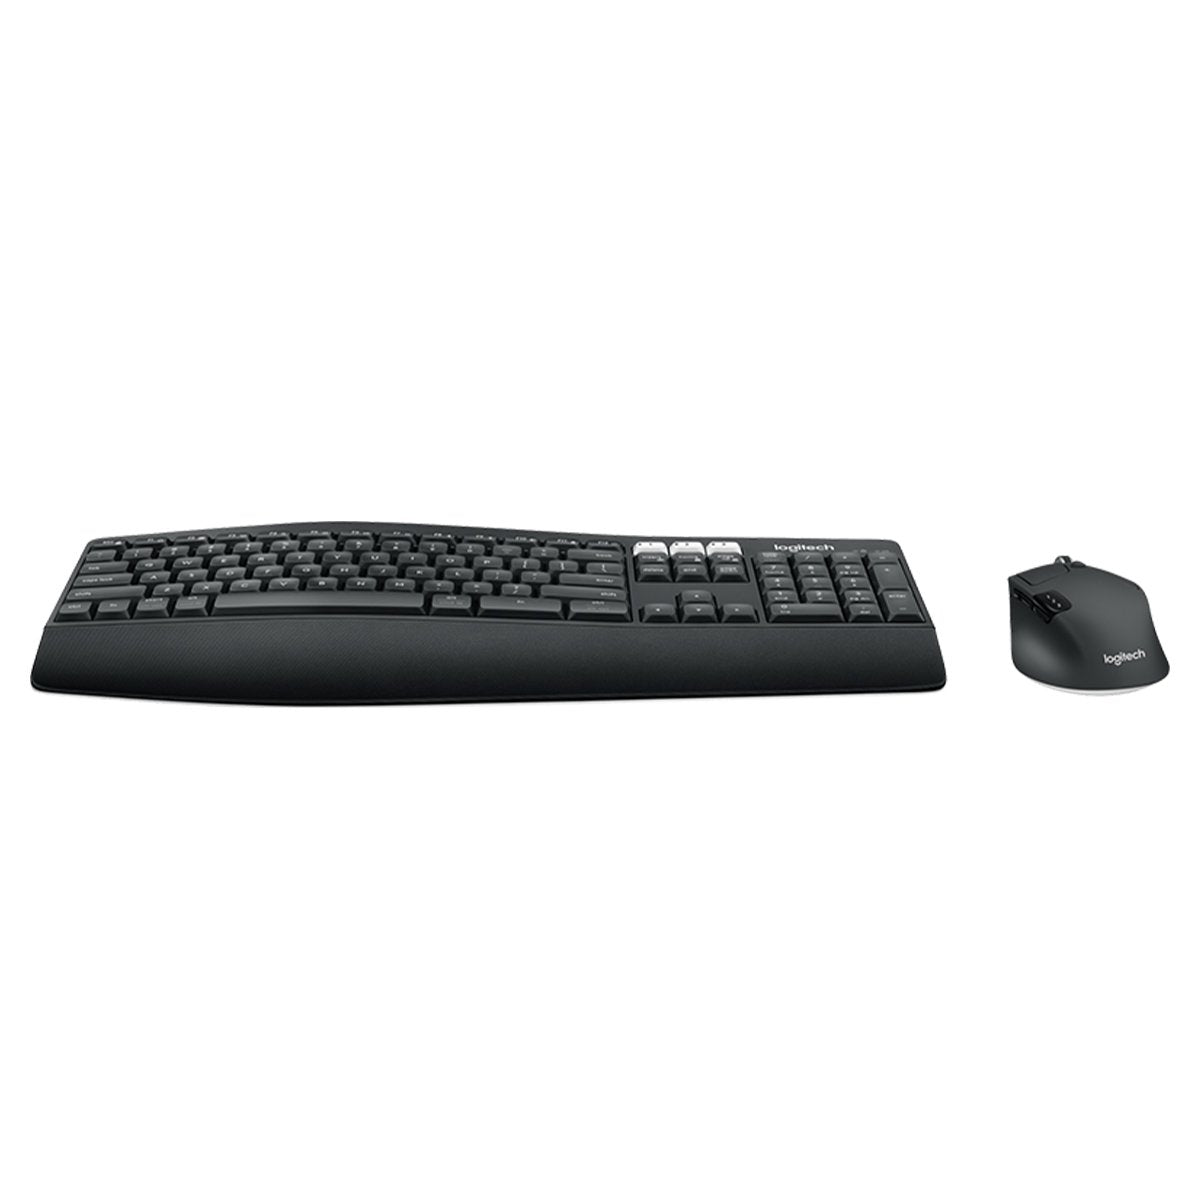 Logitech MK850 Wireless Keyboard and Optical Mouse Combo with Easy Switch Technology